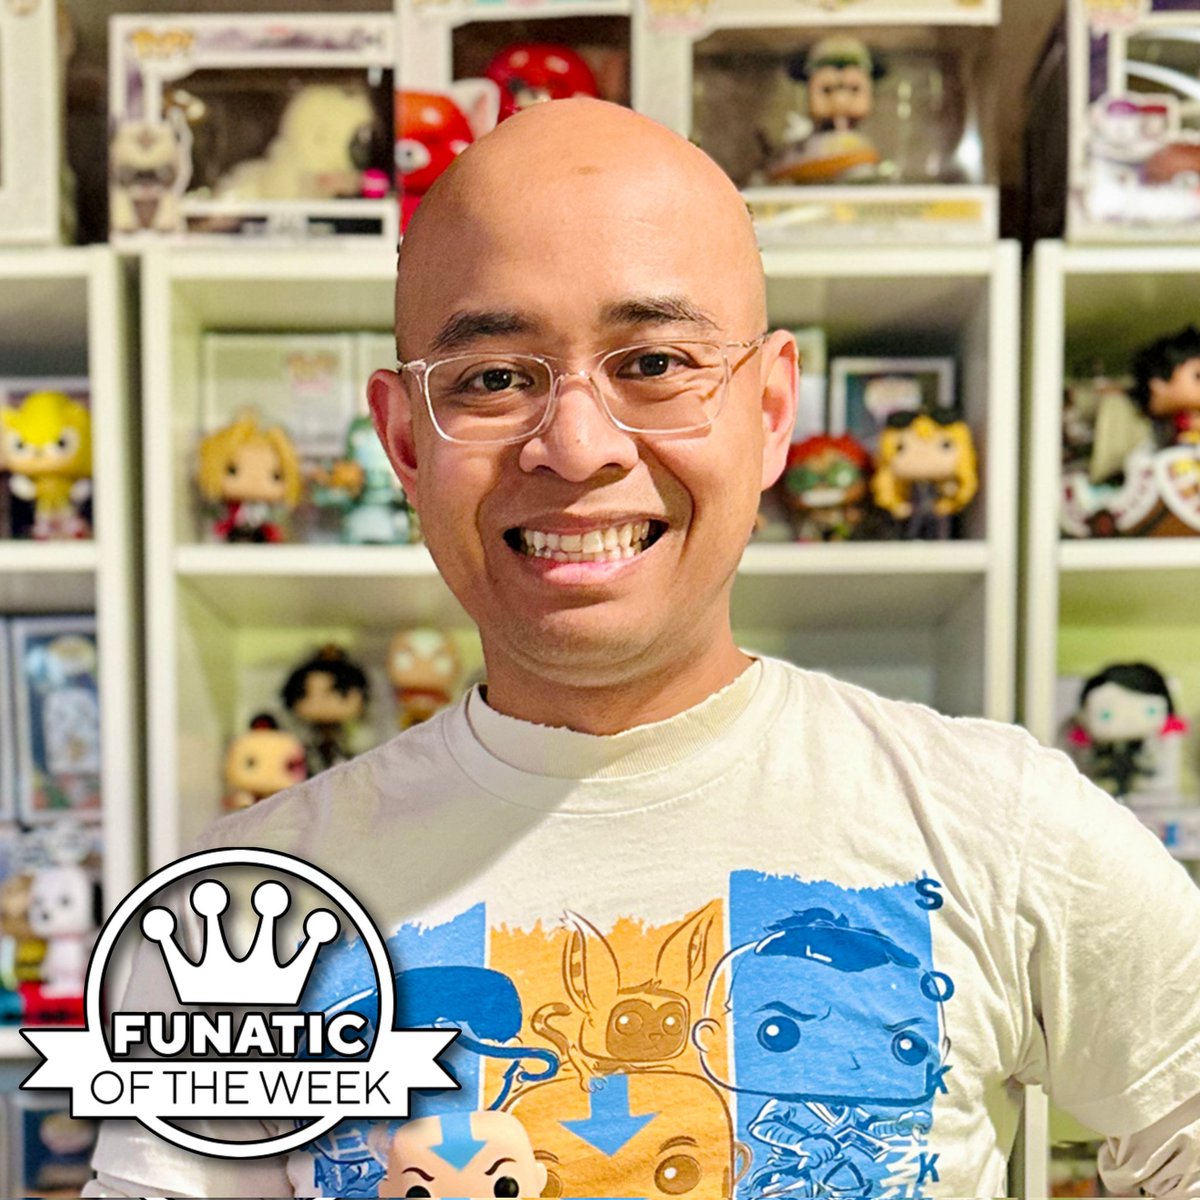 Congratulations to @FunkoLeeM on becoming the #FunaticOfTheWeek for the 3rd week of May! 👑